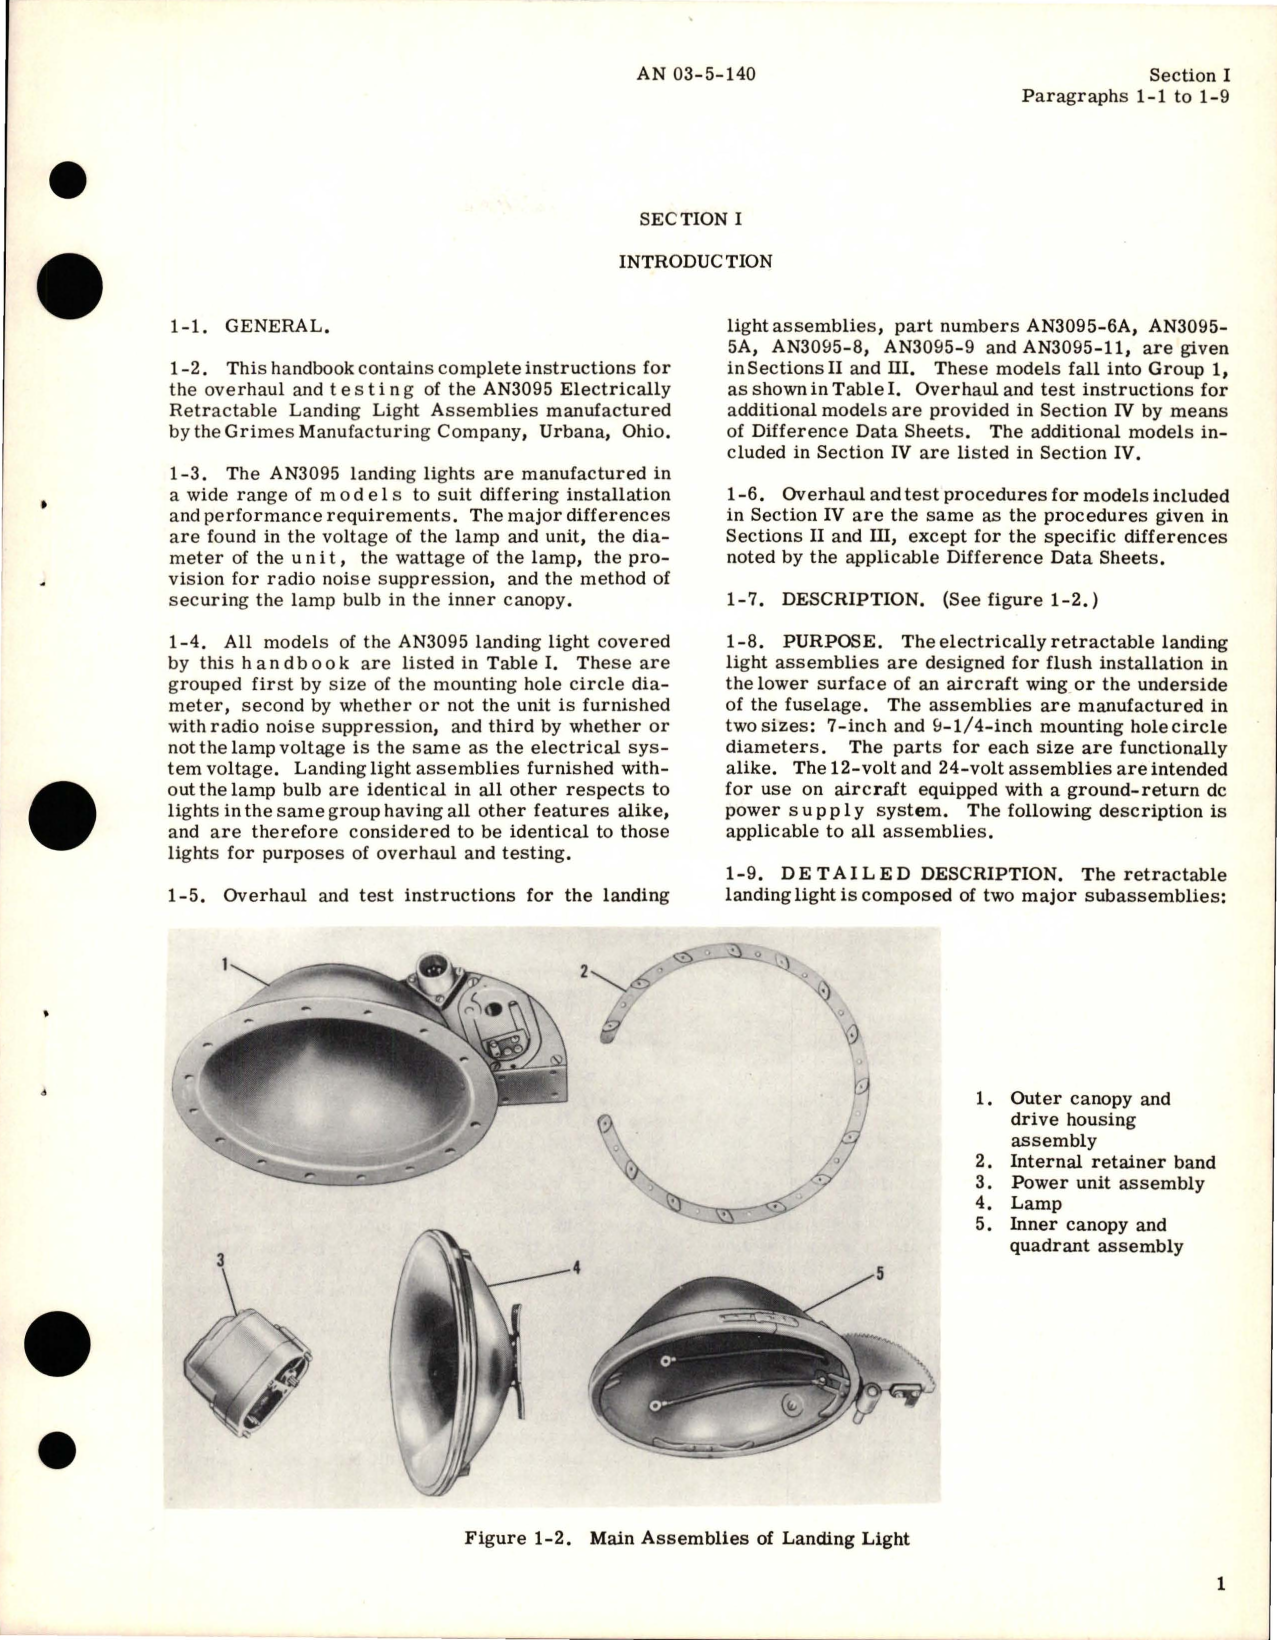 Sample page 5 from AirCorps Library document: Overhaul Instructions for Landing Light Assembly - AN 3095